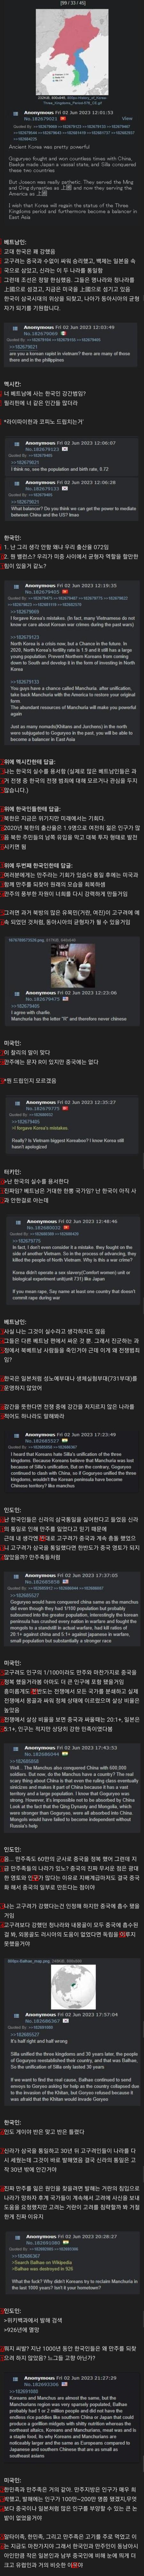 How Korea Becomes Strong in Foreign Communities